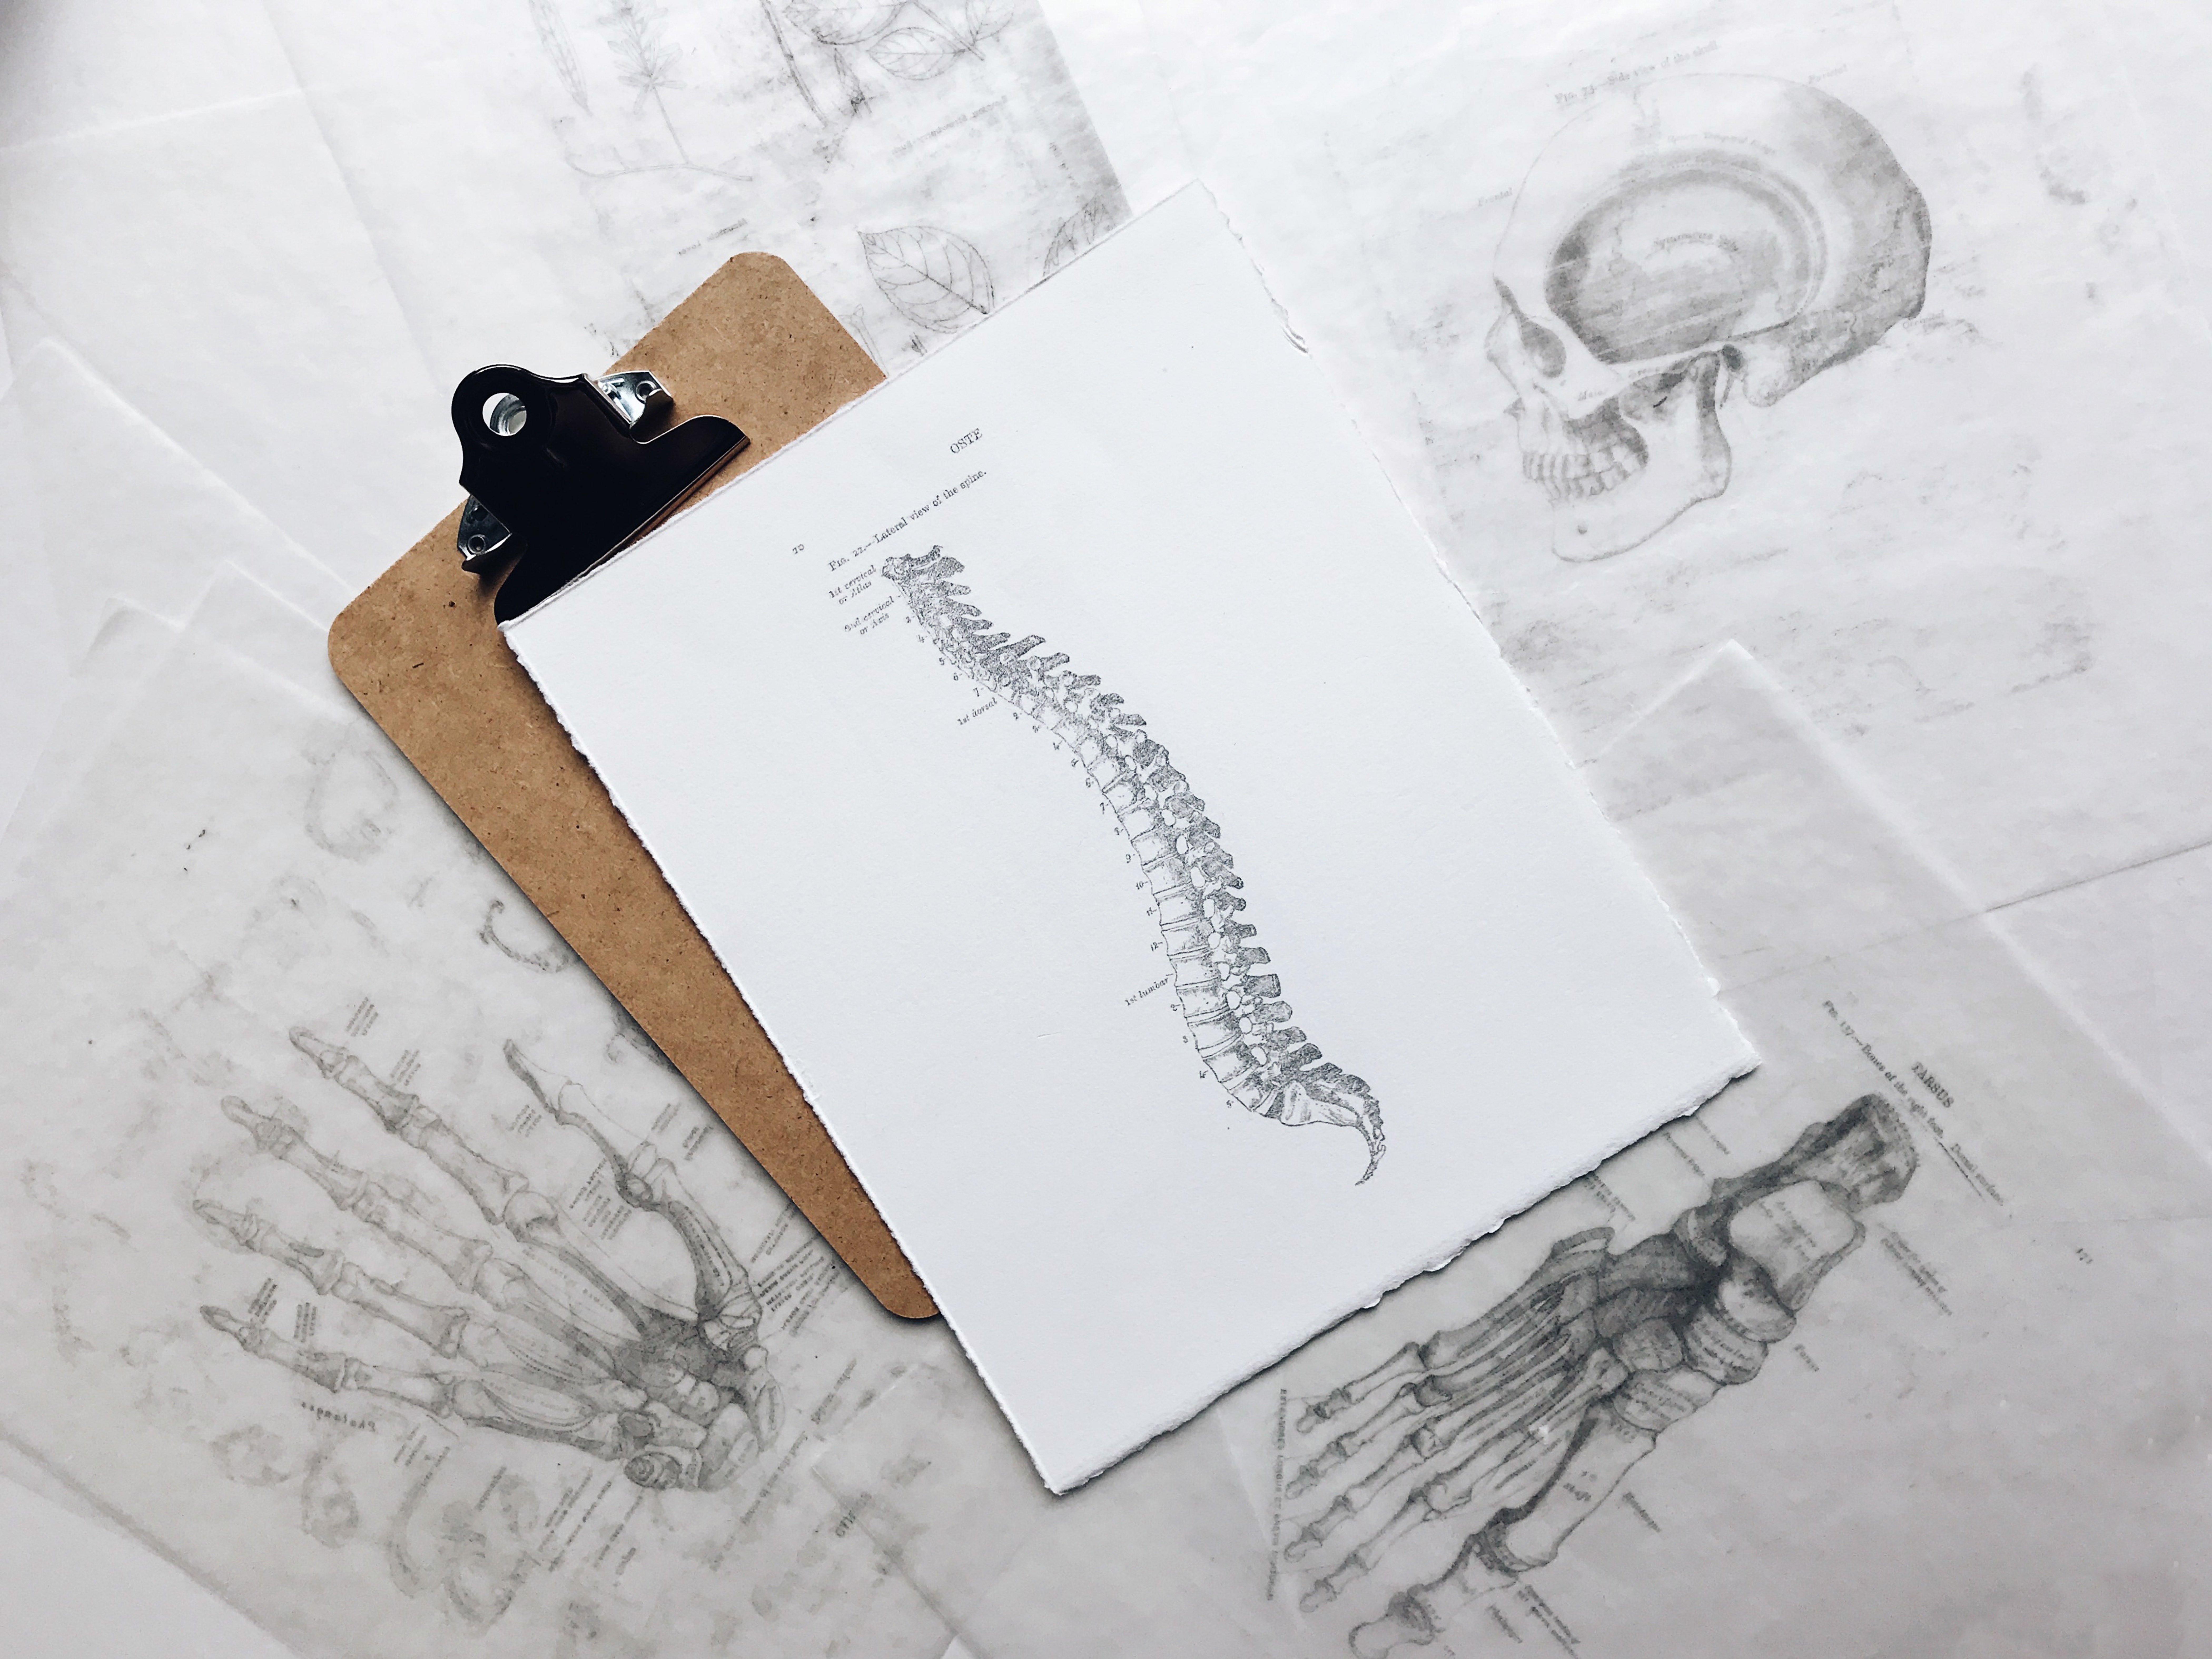 Your Neutral Spine: Why It Matters and How to Find It